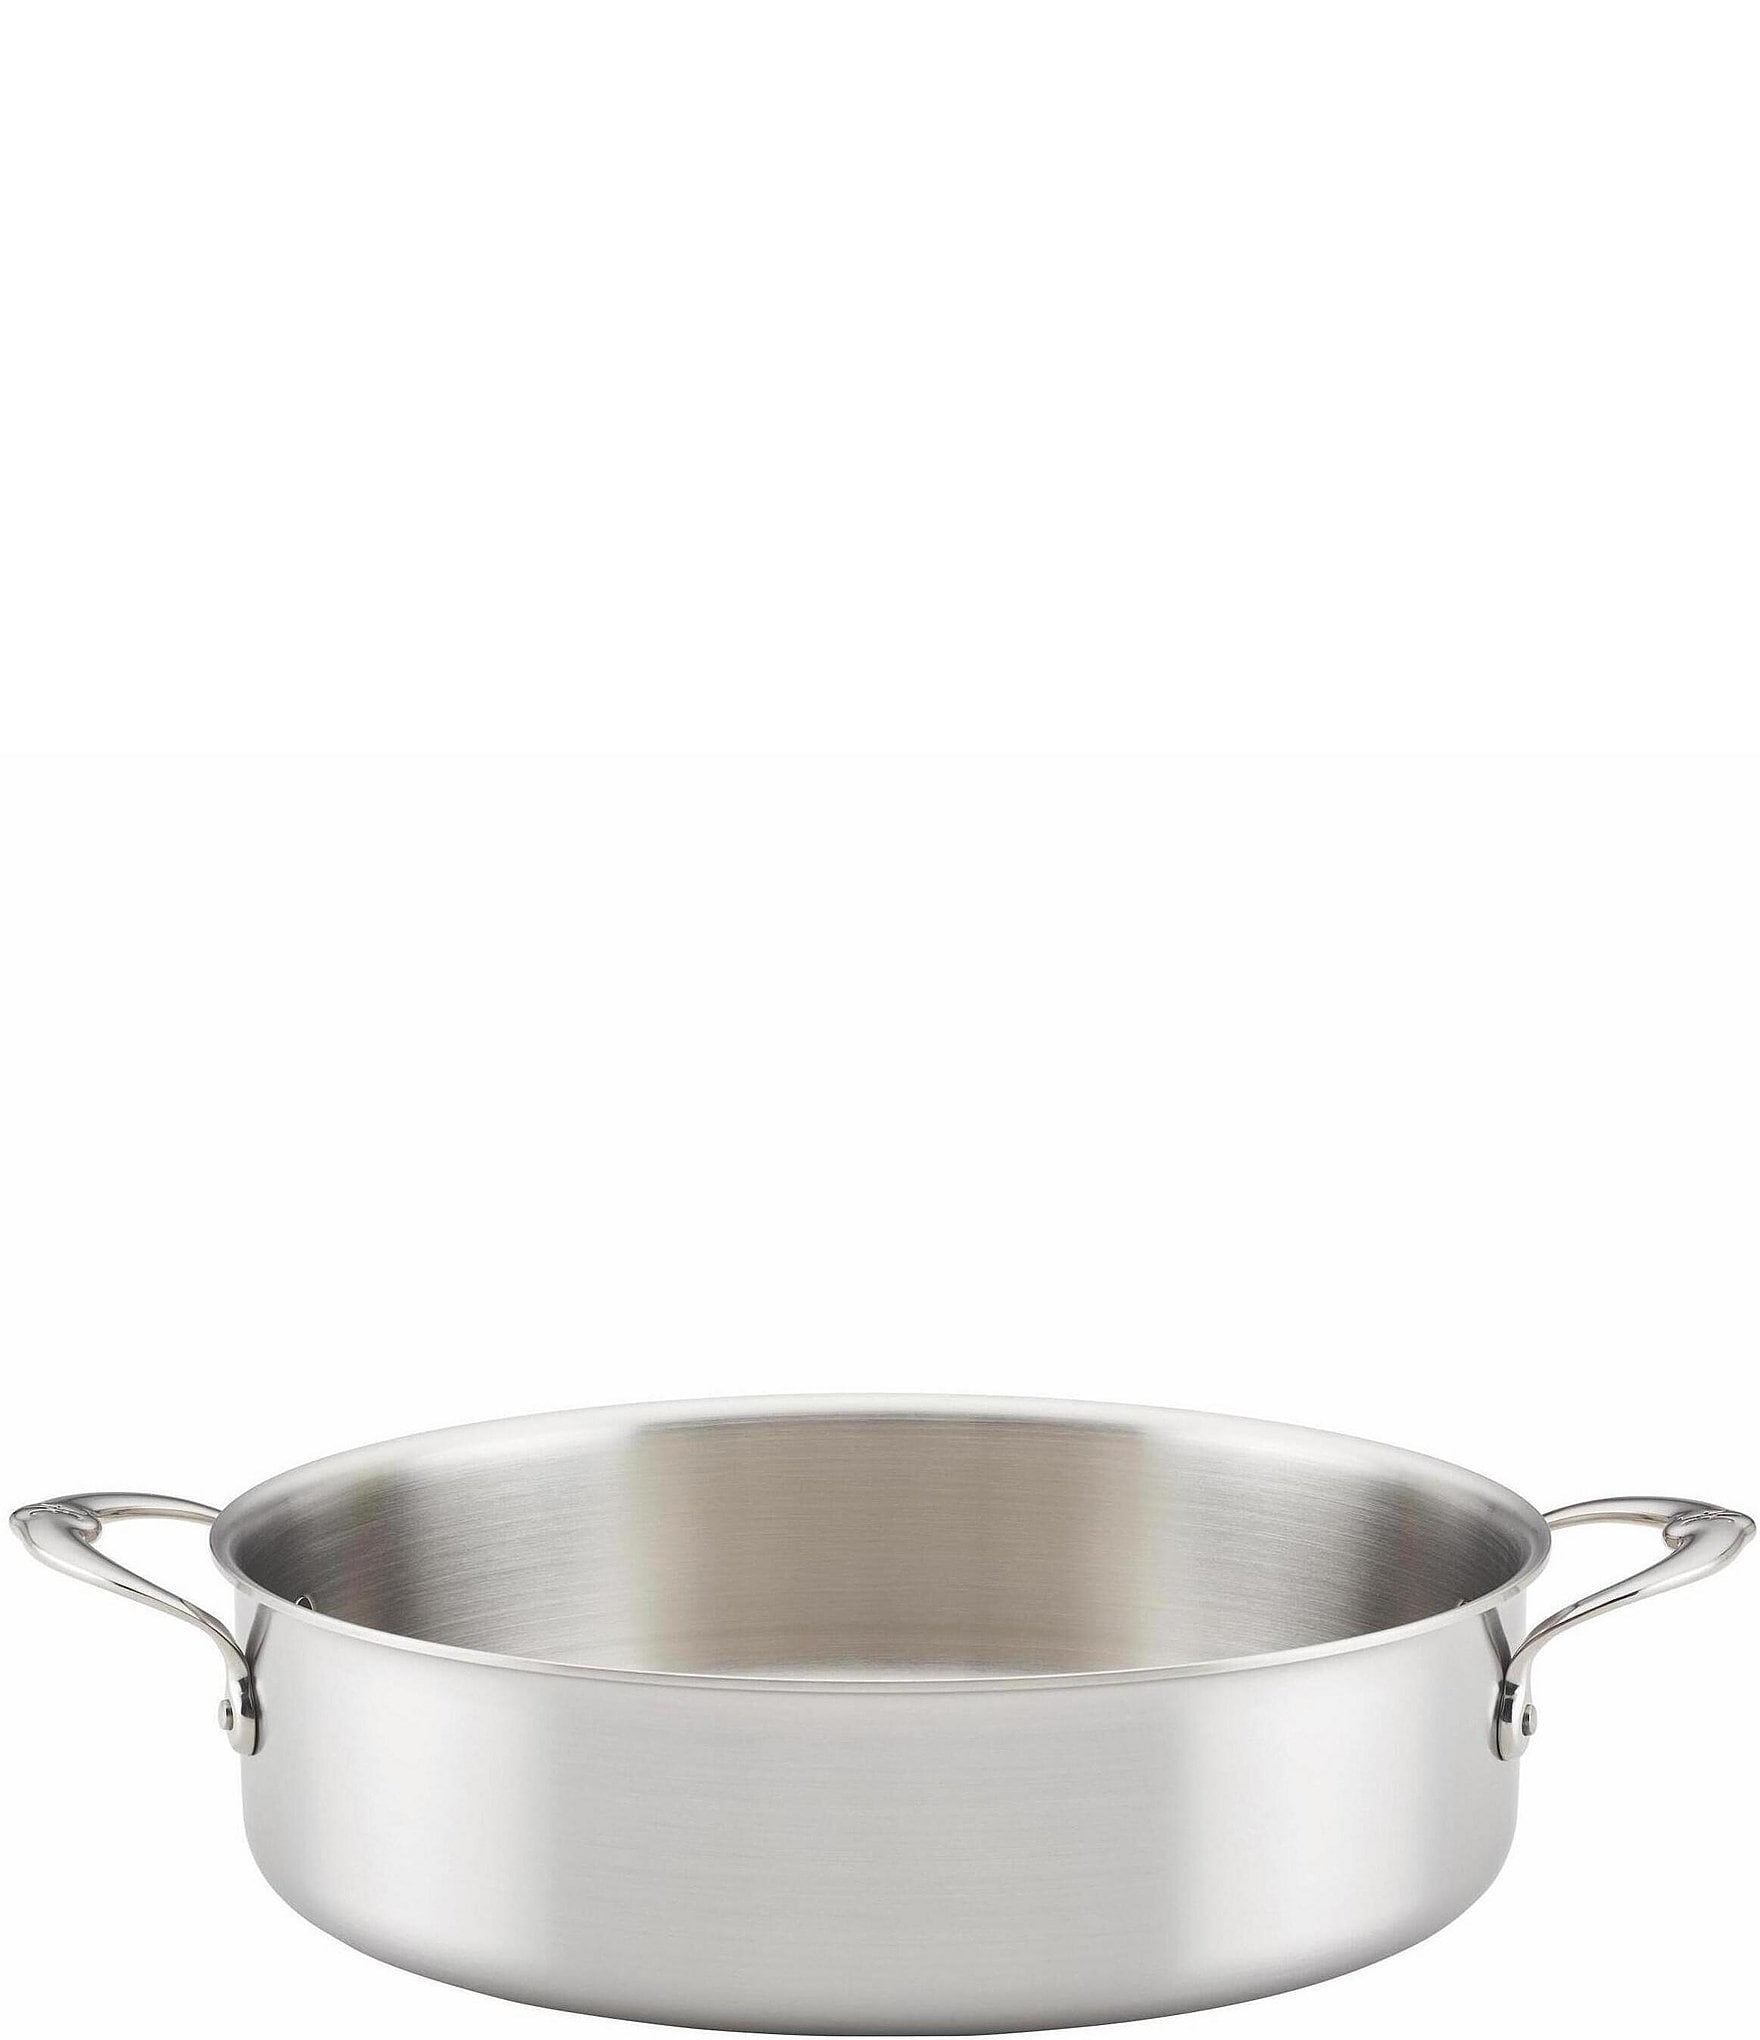 Thomas Keller Insignia Commercial Clad Stainless Steel Rondeaus